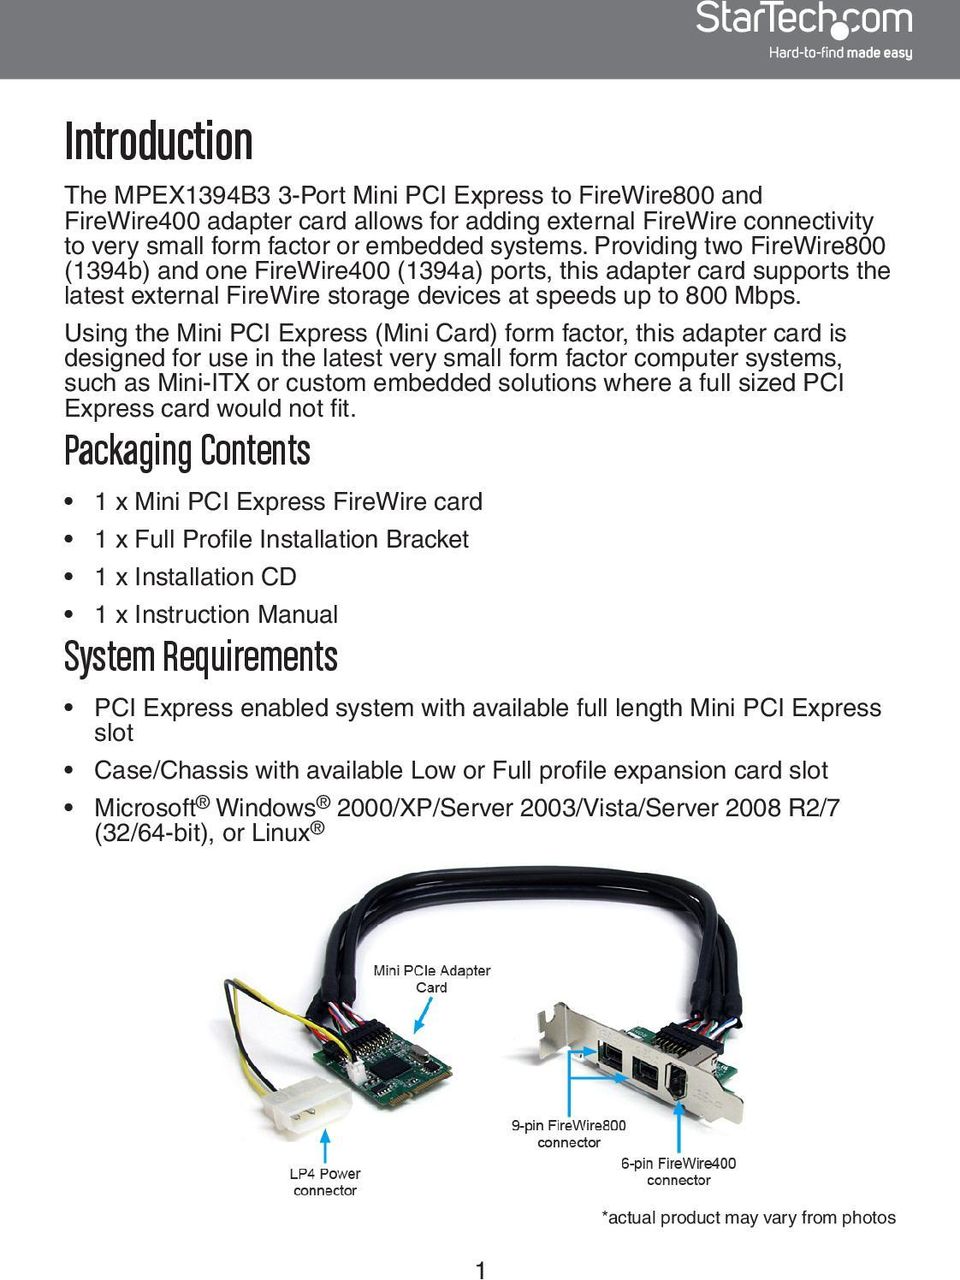 Using the Mini PCI Express (Mini Card) form factor, this adapter card is designed for use in the latest very small form factor computer systems, such as Mini-ITX or custom embedded solutions where a